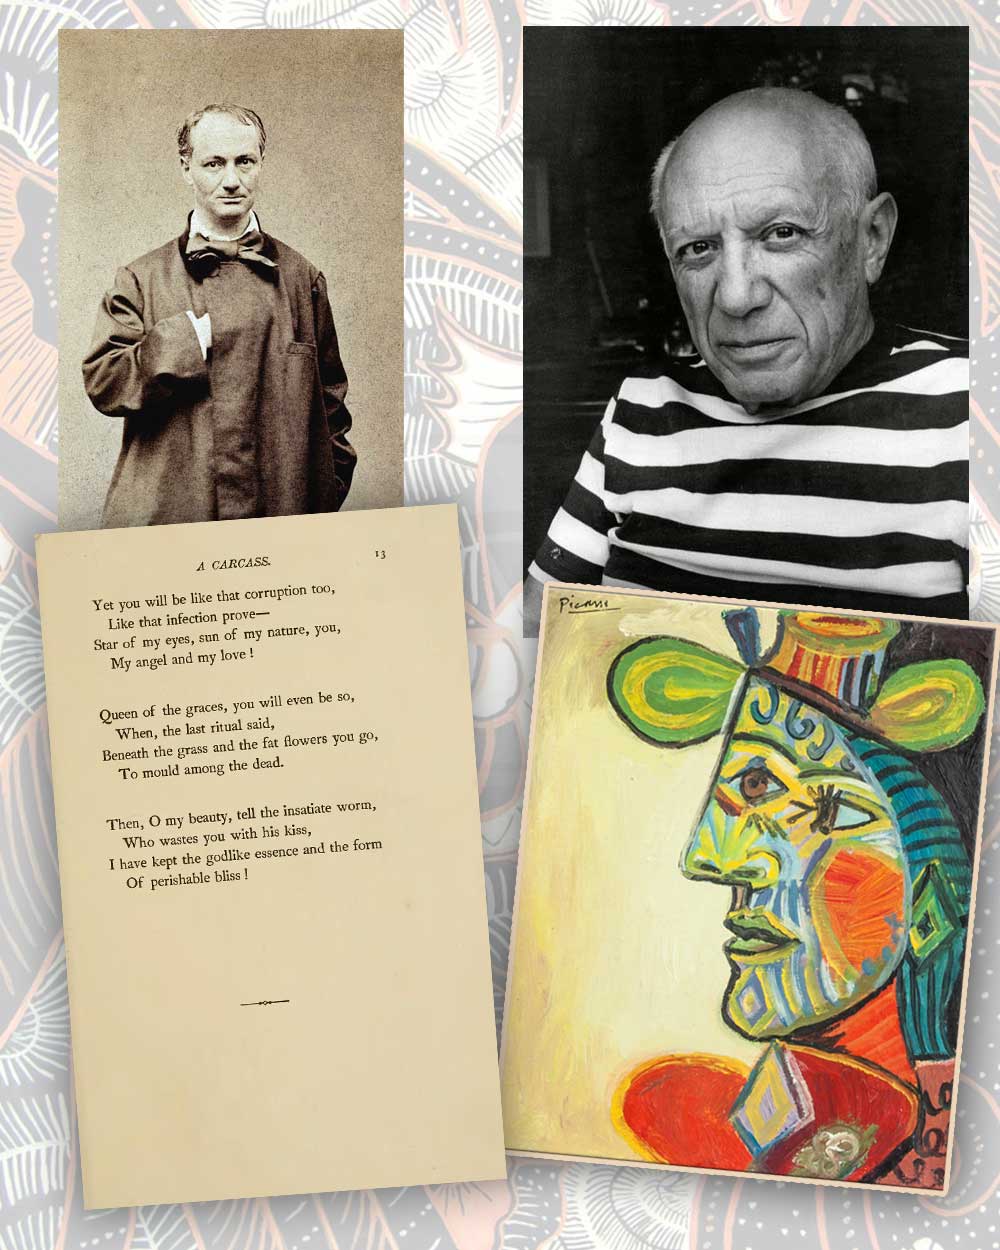 Pablo Picasso and Charles Baudelaire